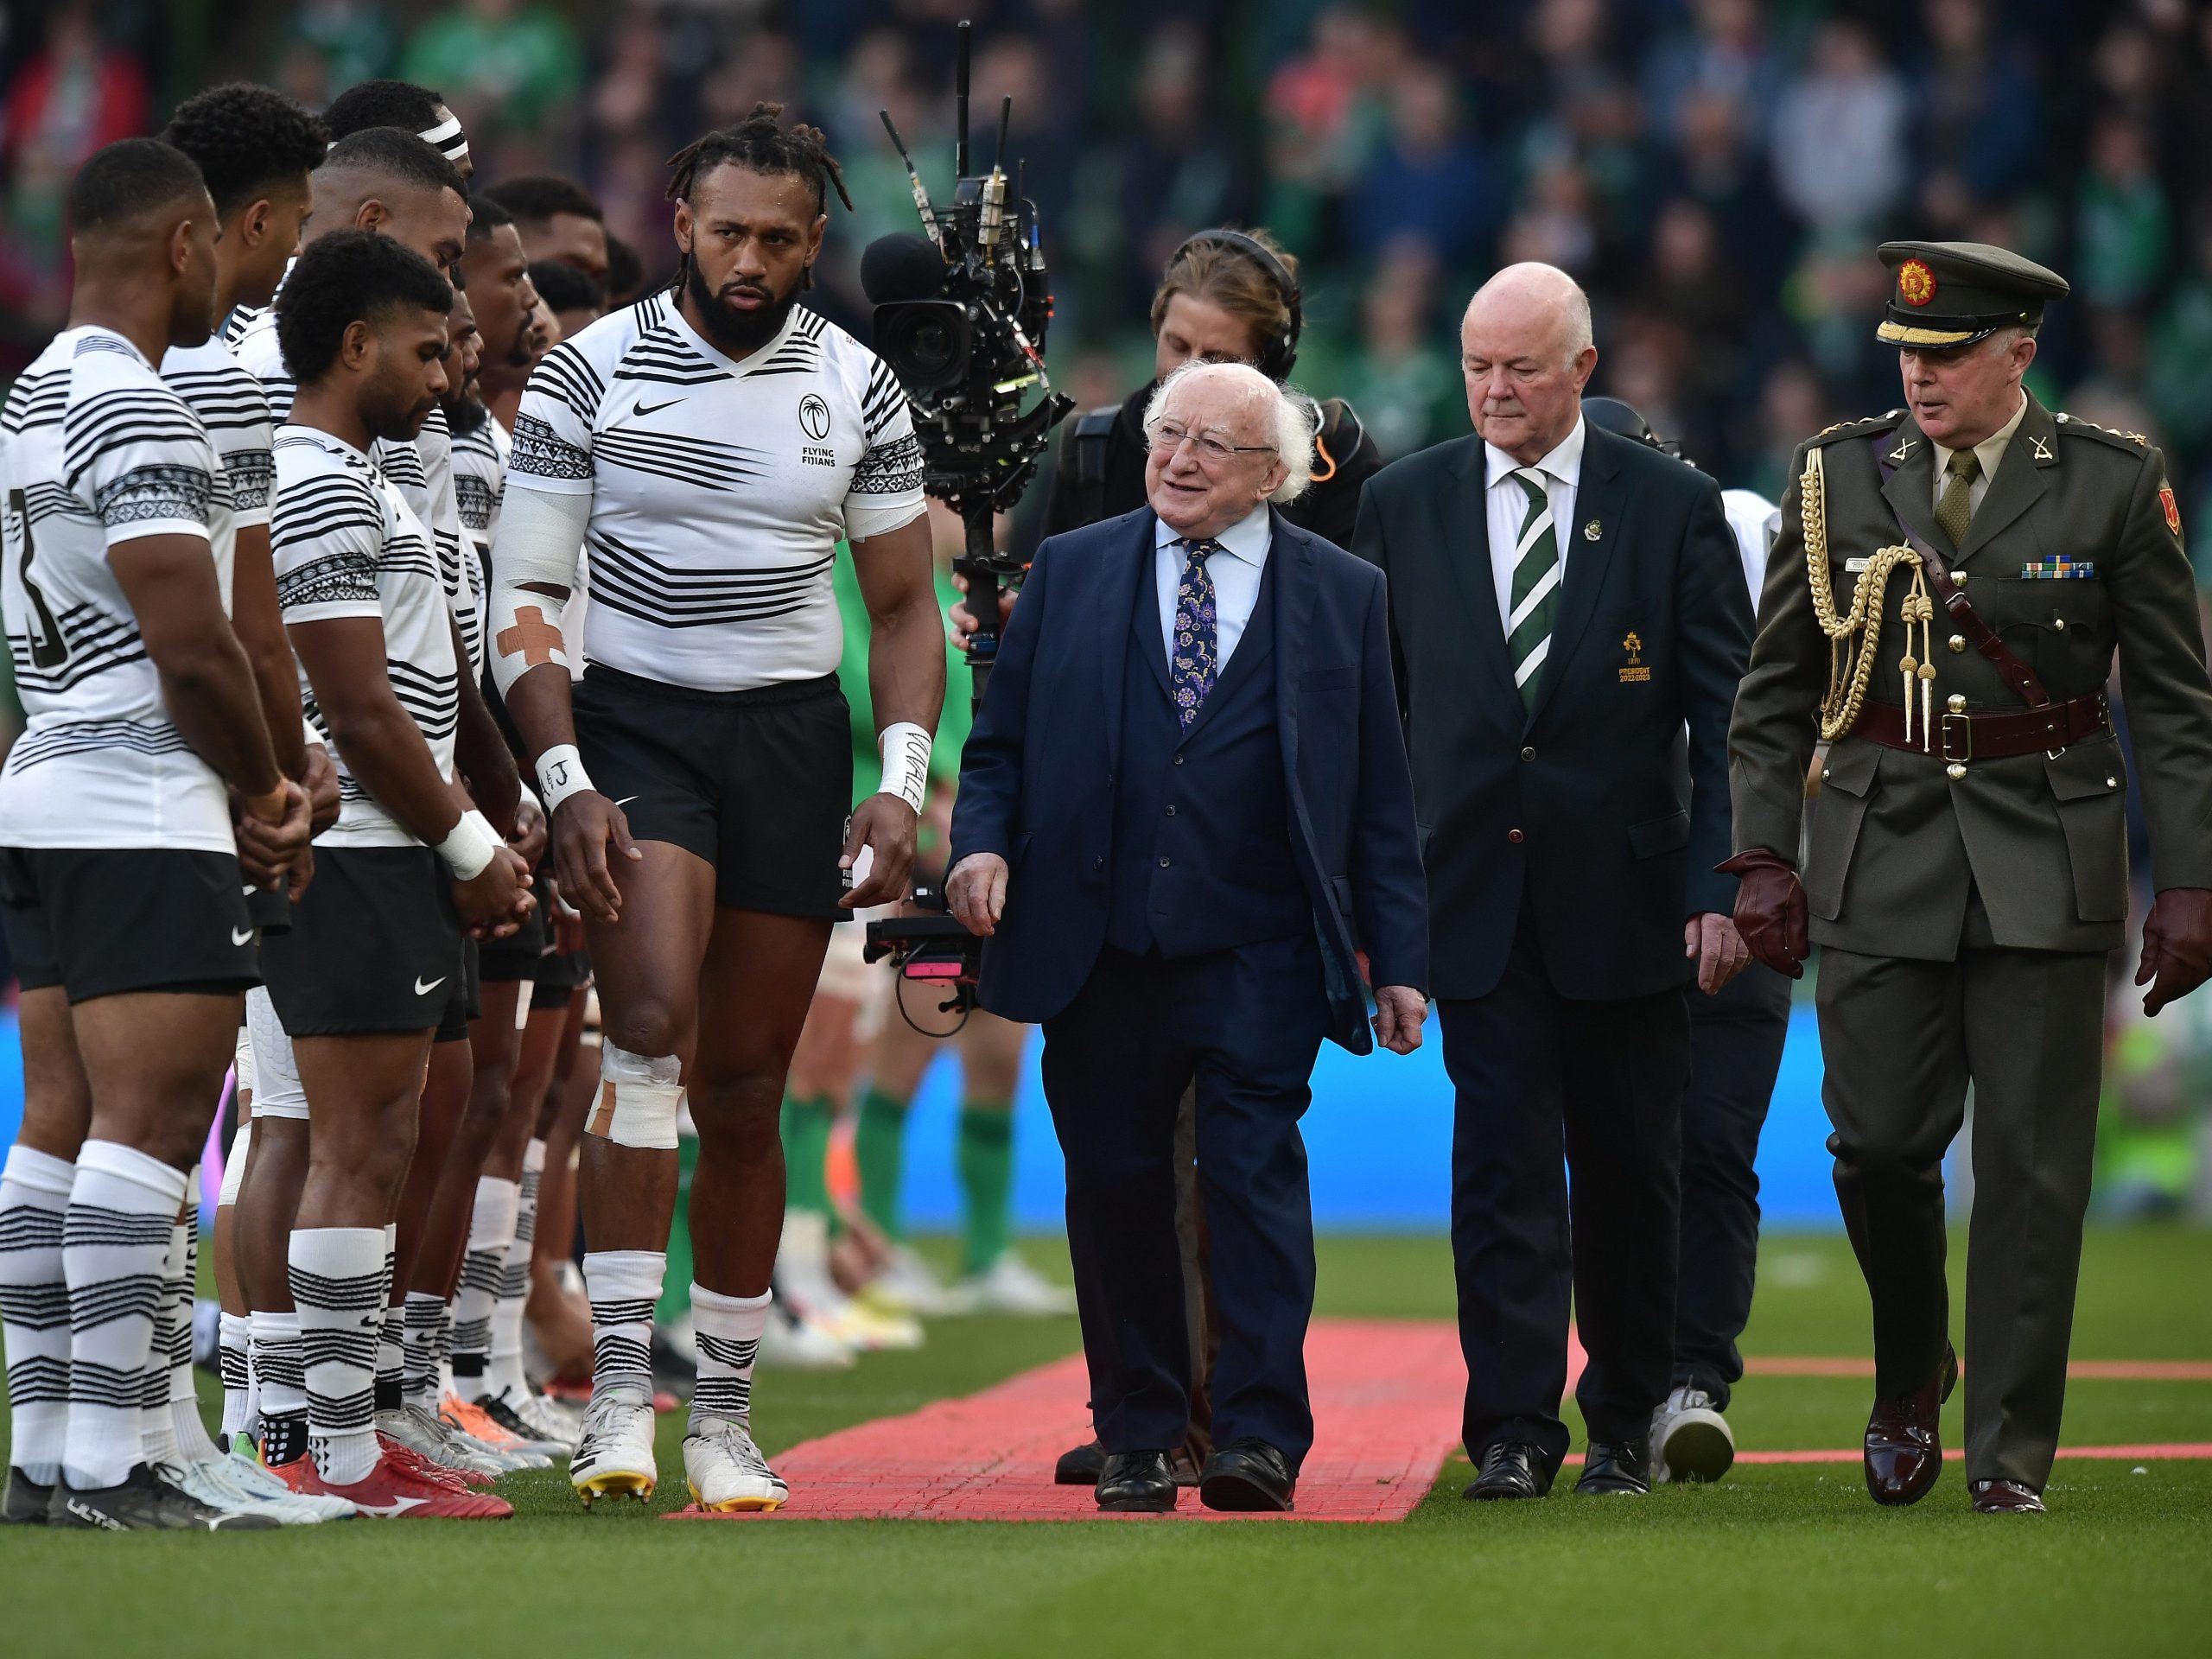 DUBLIN, IRELAND - NOVEMBER 12: Ireland president Michael D Higgins greets the teams before the Autumn International match between Ireland and Fiji at Aviva Stadium on November 12, 2022 in Dublin, Dublin. (Photo by Charles McQuillan/Getty Images)